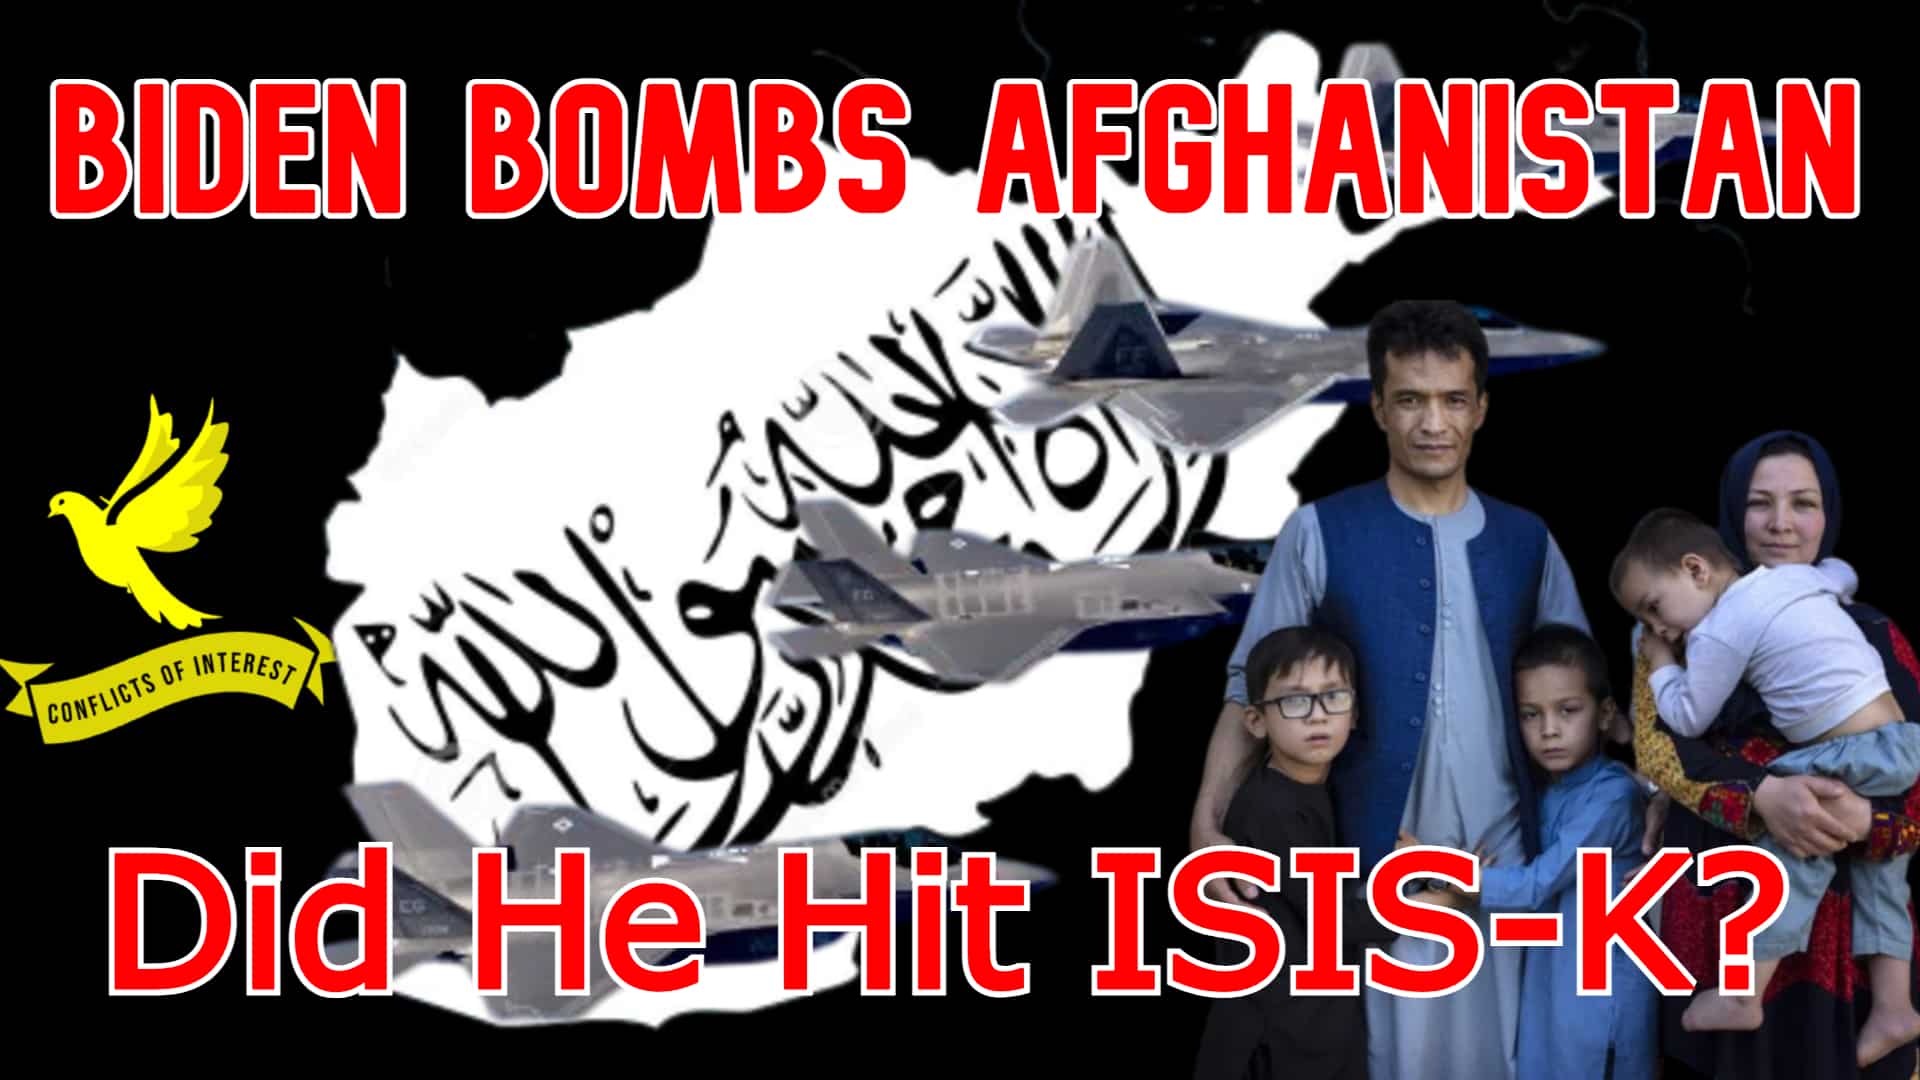 COI #155: US Bombs Afghanistan, Claims to Target ISIS, Wipes Out a Family